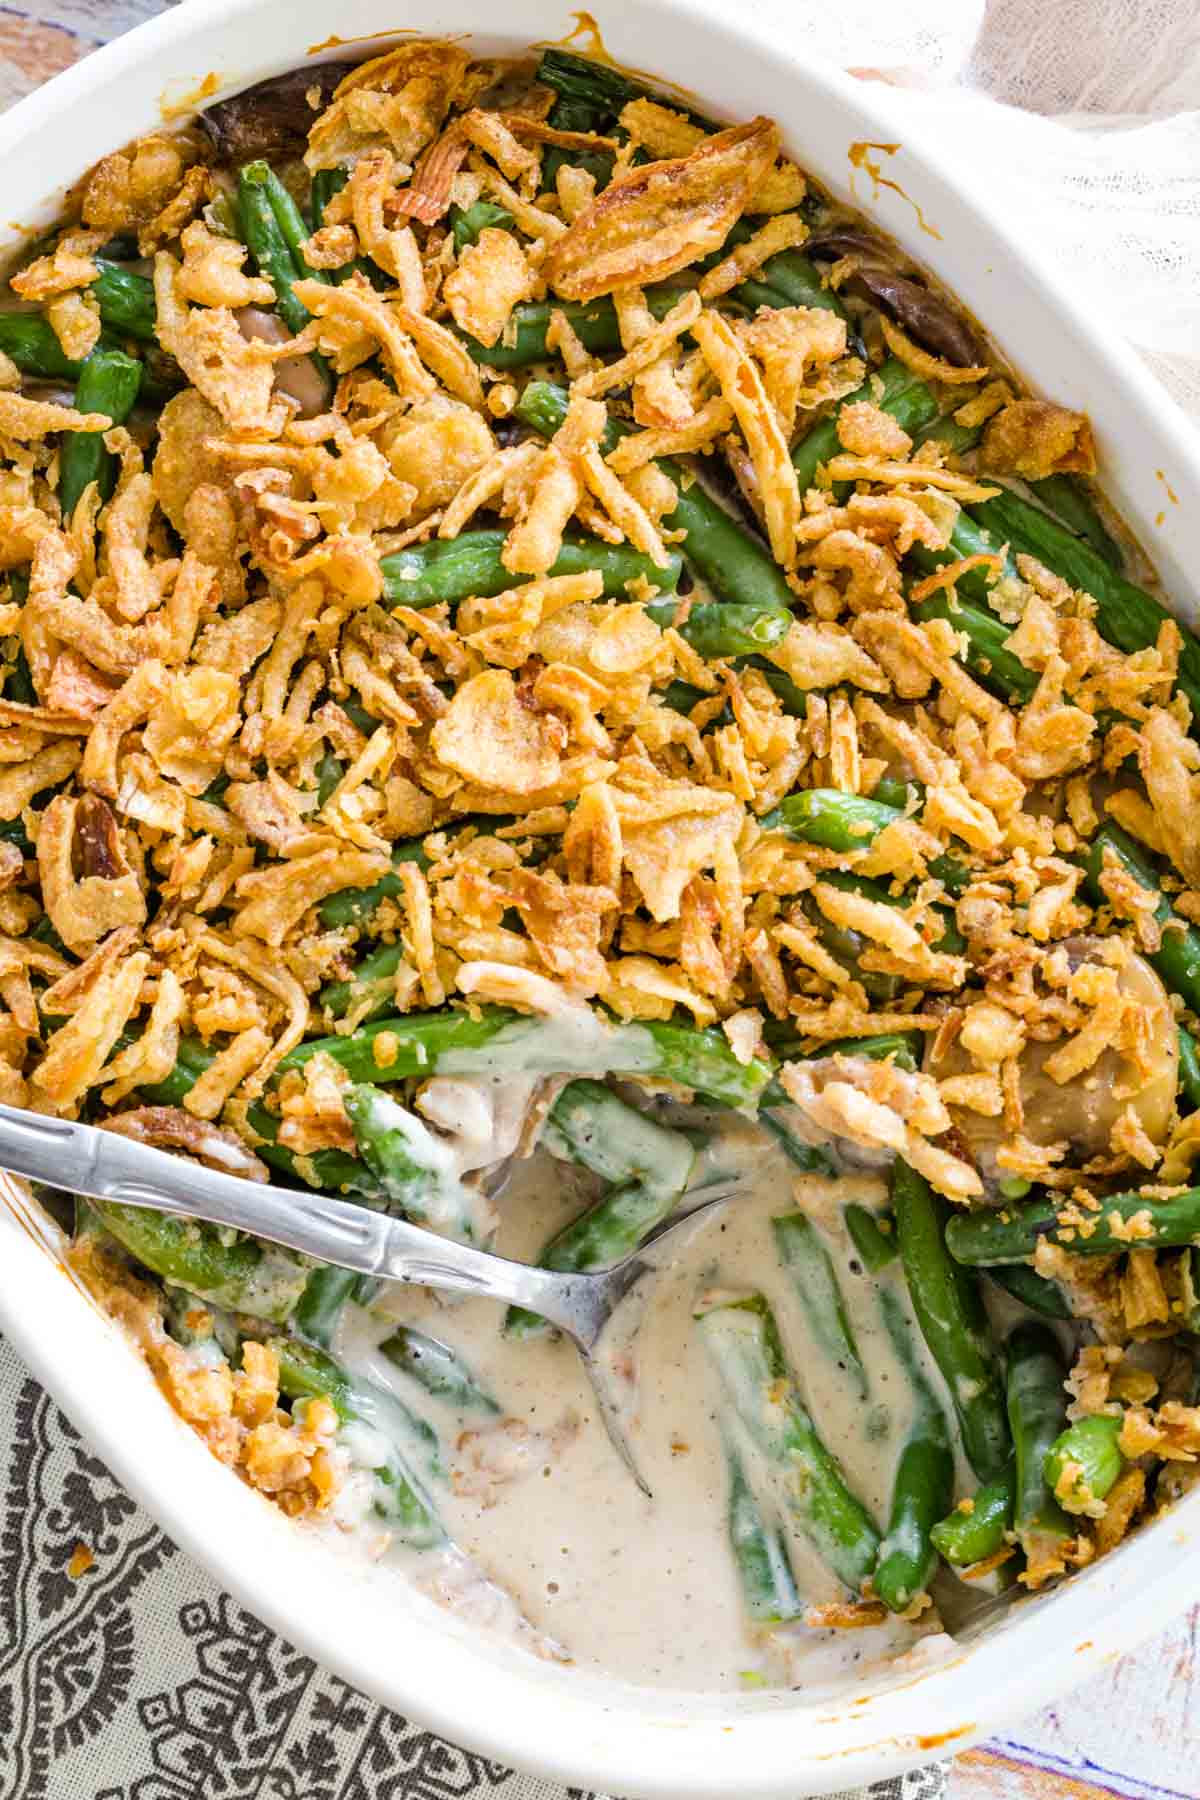 Overhead view of a gluten-free green bean casserole in a baking dish with a corner serving missing.